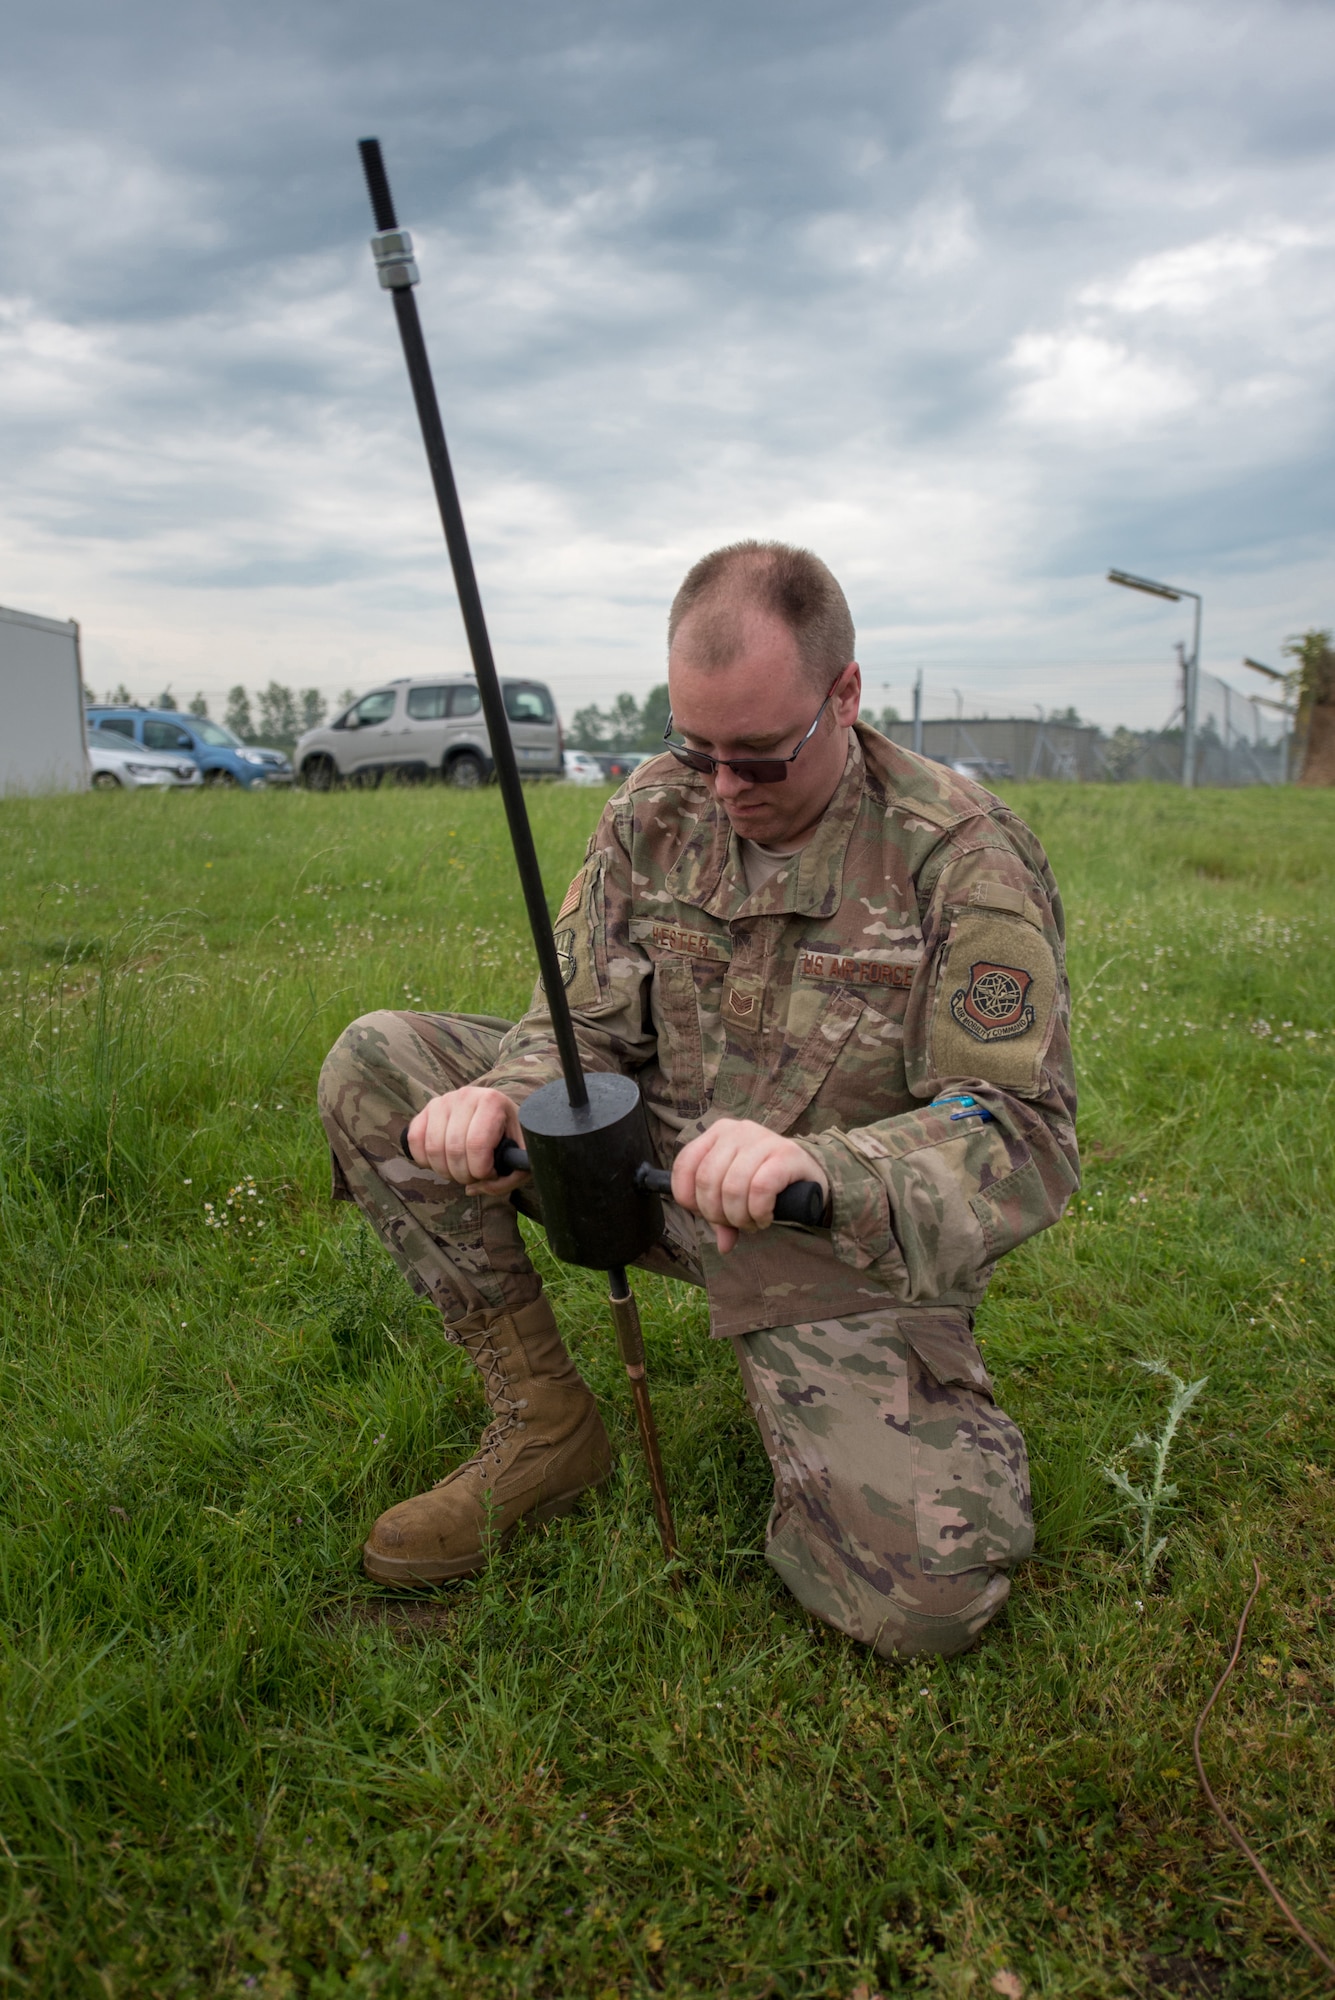 Staff Sgt. Courtnay Hester, an aircraft generation equipment mechanic for the Kentucky Air National Guard’s 123rd Global Mobility Squadron, buries a ground rod for a generator at Évreux-Fauville Air Base in Évreux, France, June 4, 2019. Two C-130s and more than 30 Airmen from the Kentucky Air Guard’s 123rd Airlift Wing deployed from their base in Louisville, Ky., to participate in aerial events over Normandy, France, for the 75th anniversary of D-Day. The D-Day invasion, formally known as Operation Overlord, turned the tide of World War II in the European theater. (U.S. Air National Guard photo by Phil Speck)